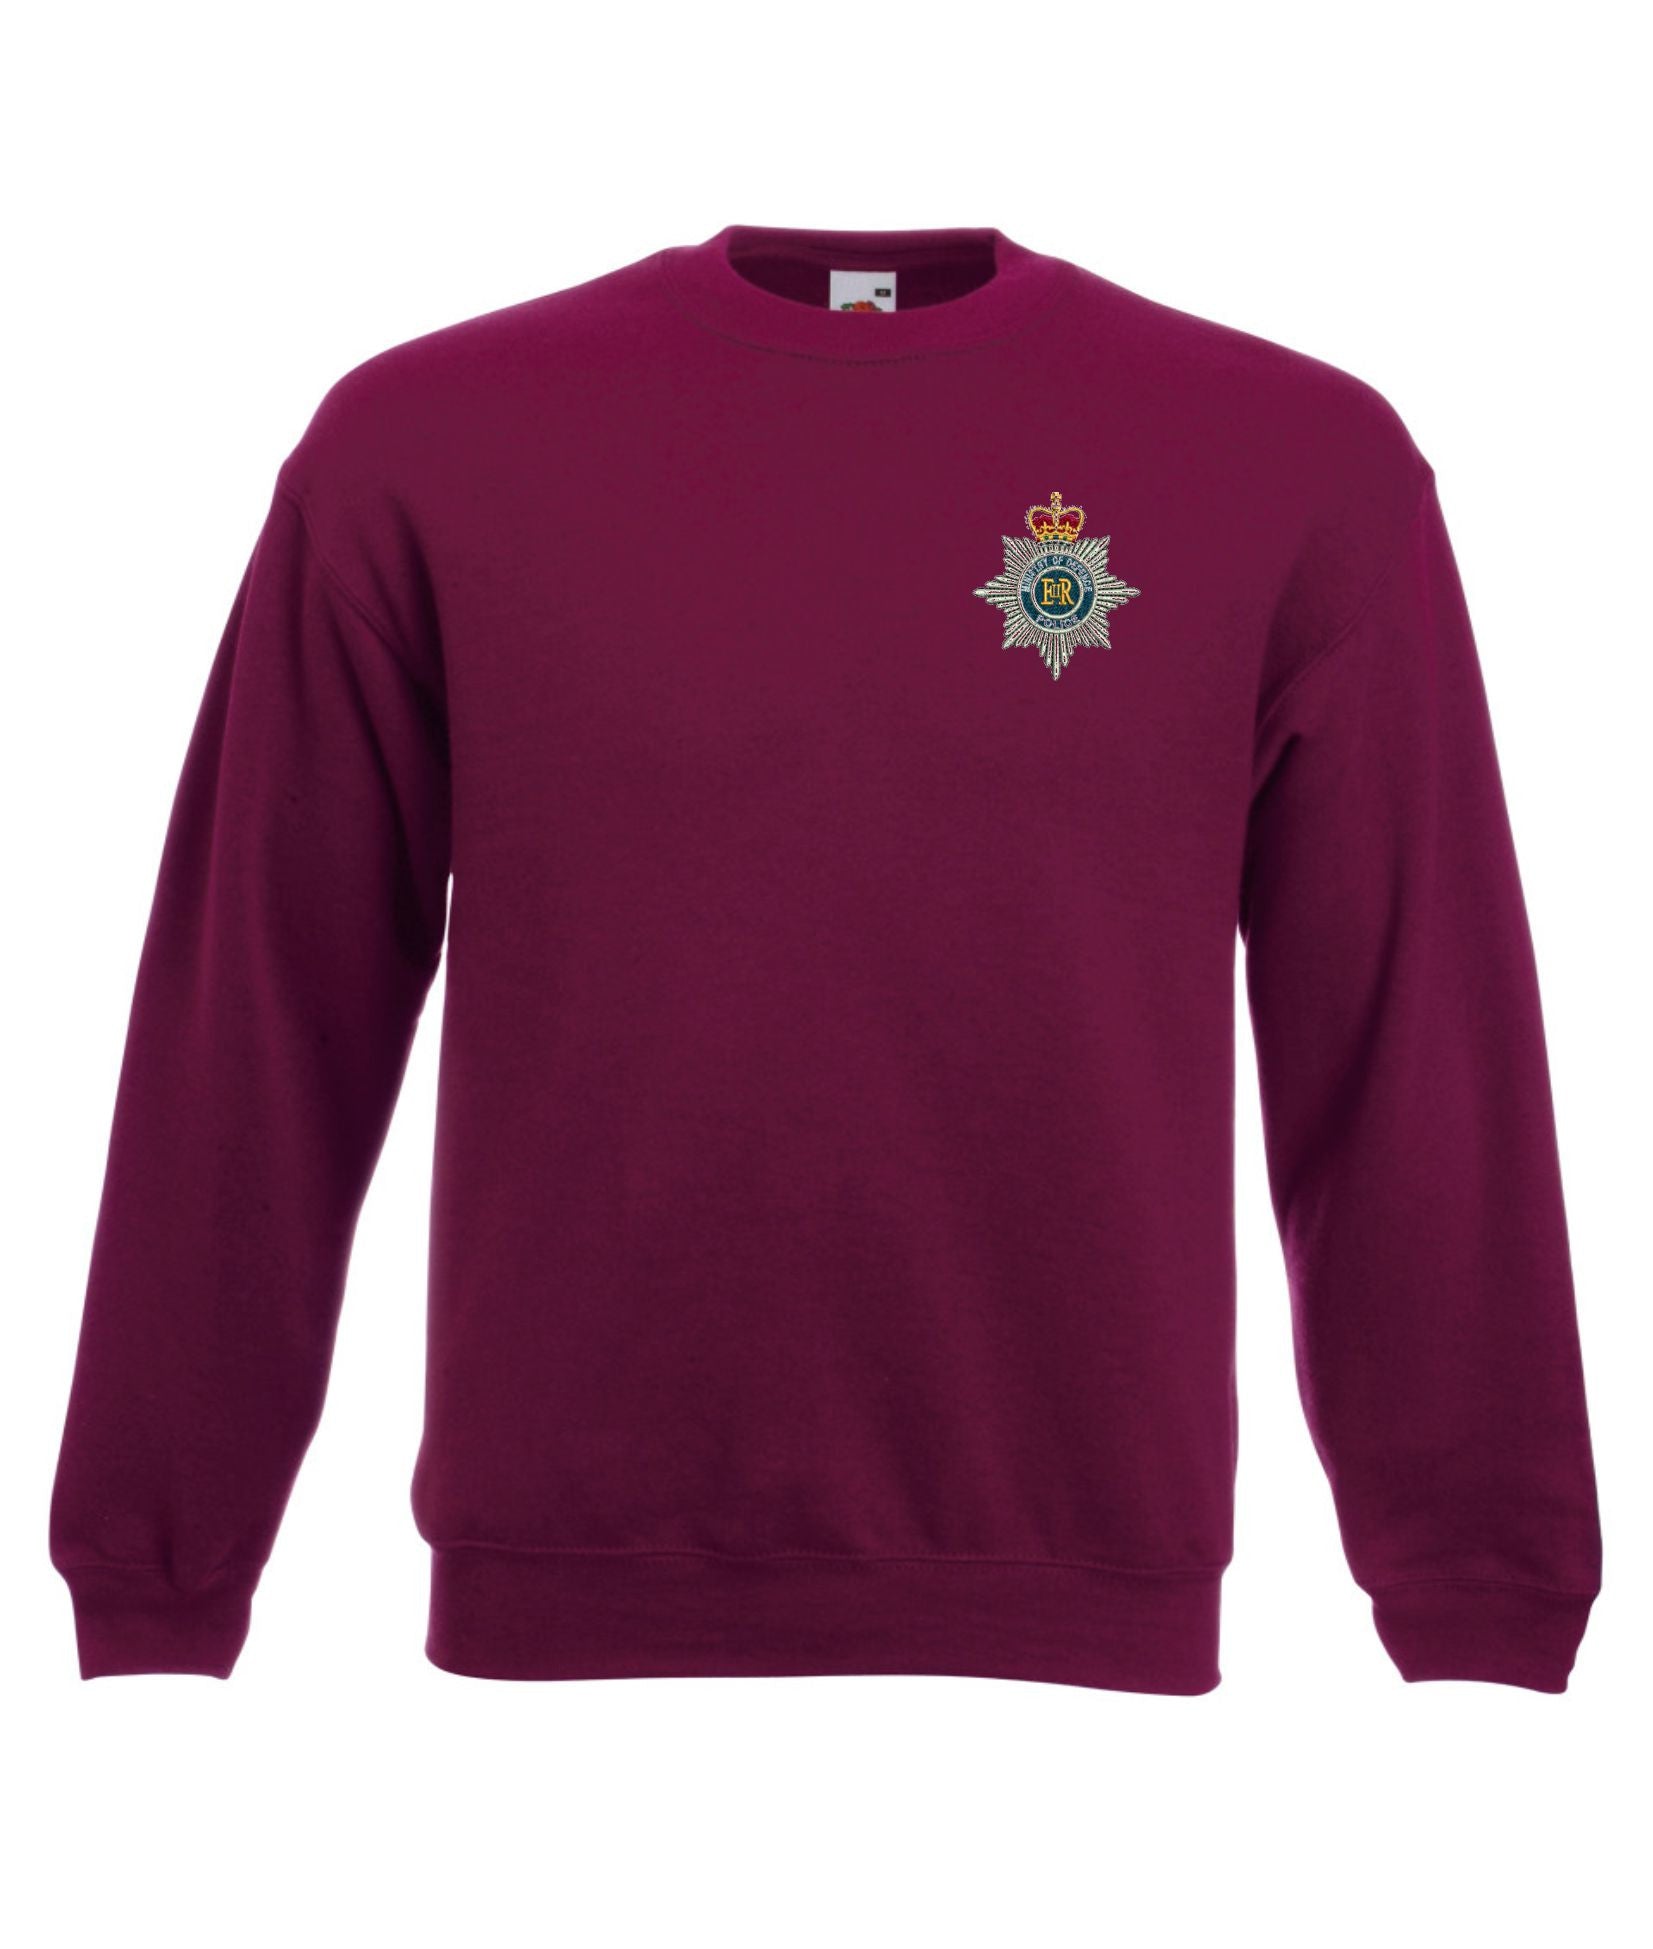 Ministry of defence police  Sweatshirts